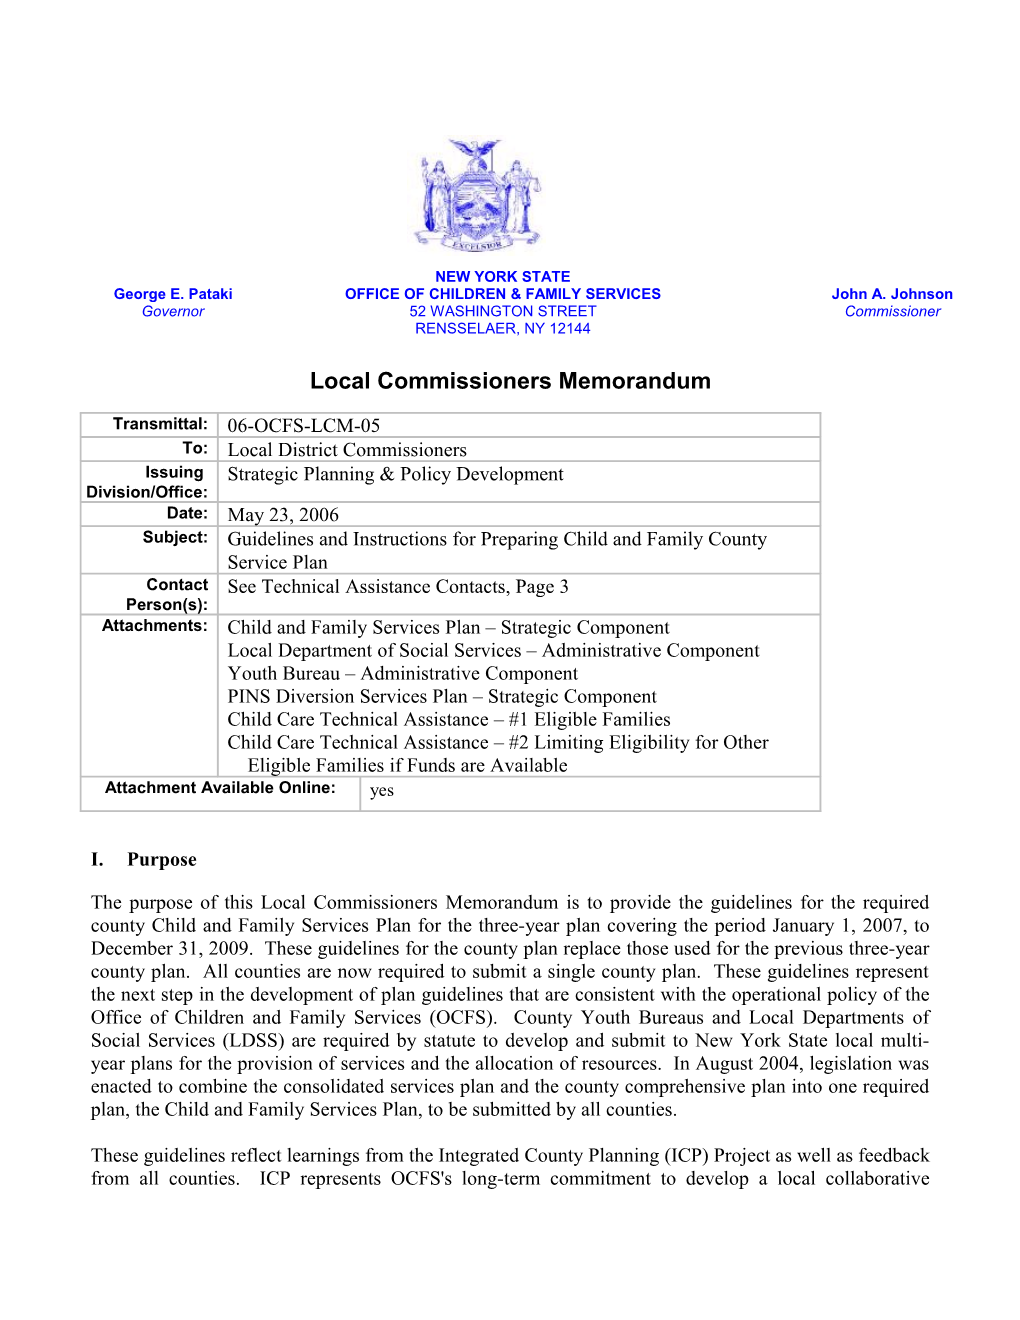 03-OCFS-LCM-19 Guidelines and Instructions for Preparing County Service Plans